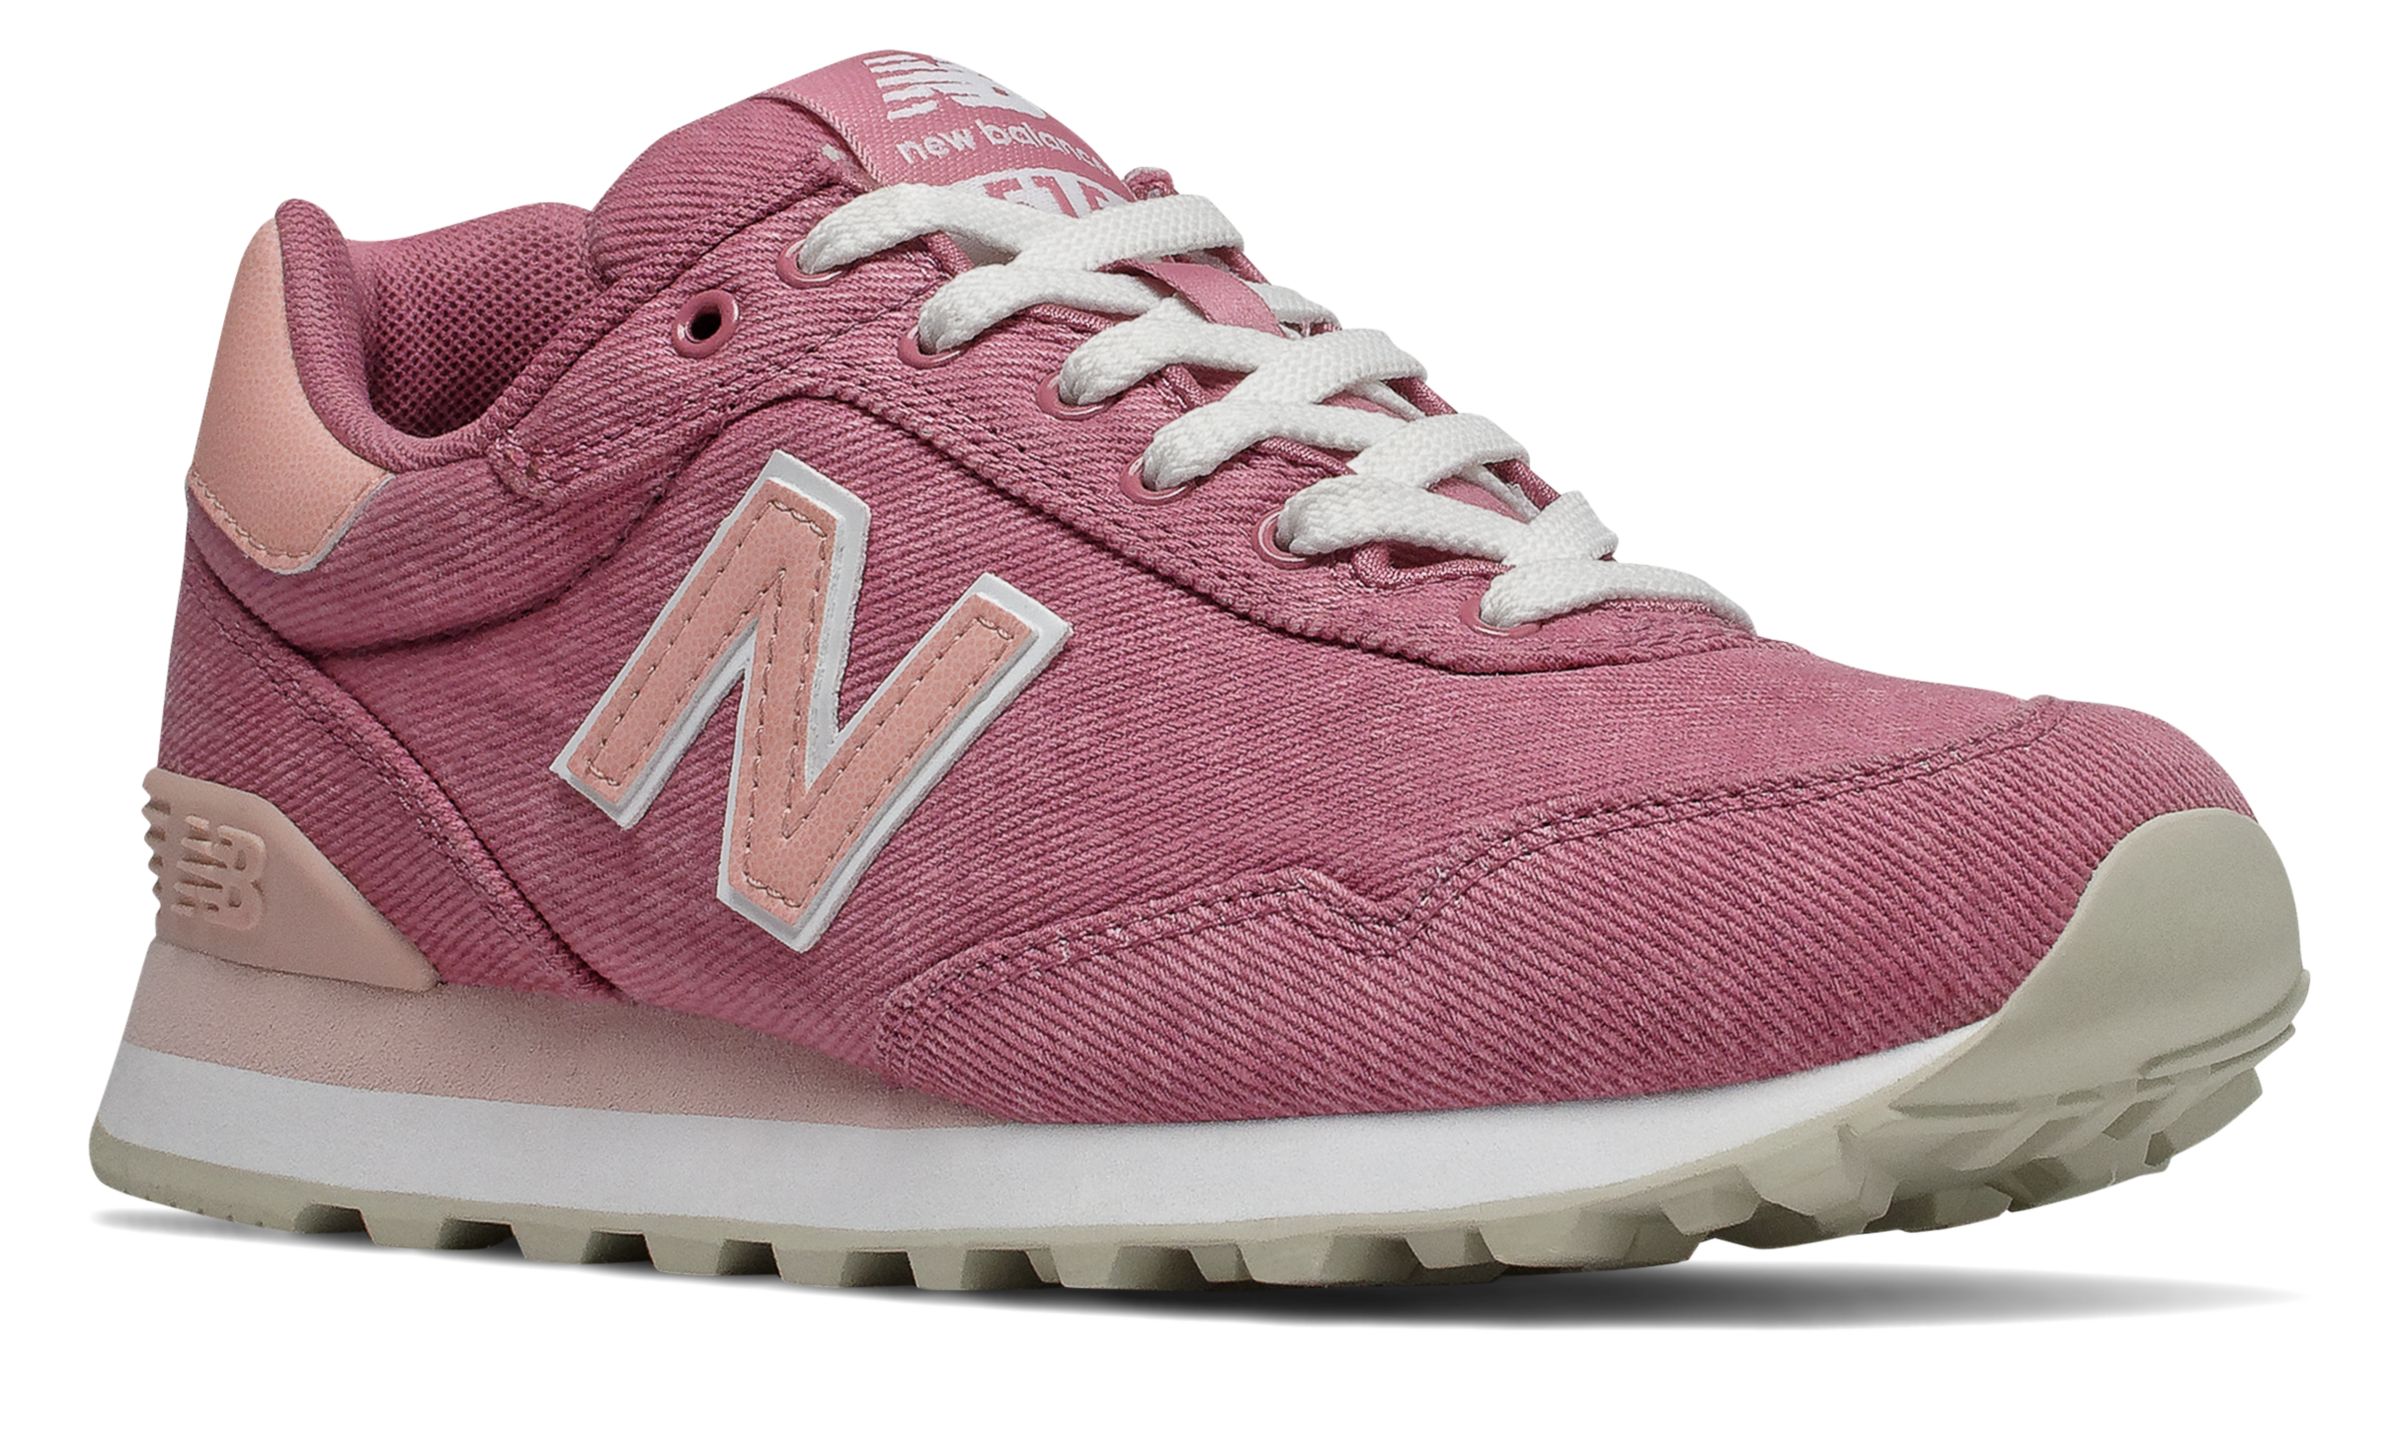 New Balance WL515V1-25072-W on Sale - Discounts Up to 57% Off on WL515BOM  at Joe's New Balance Outlet